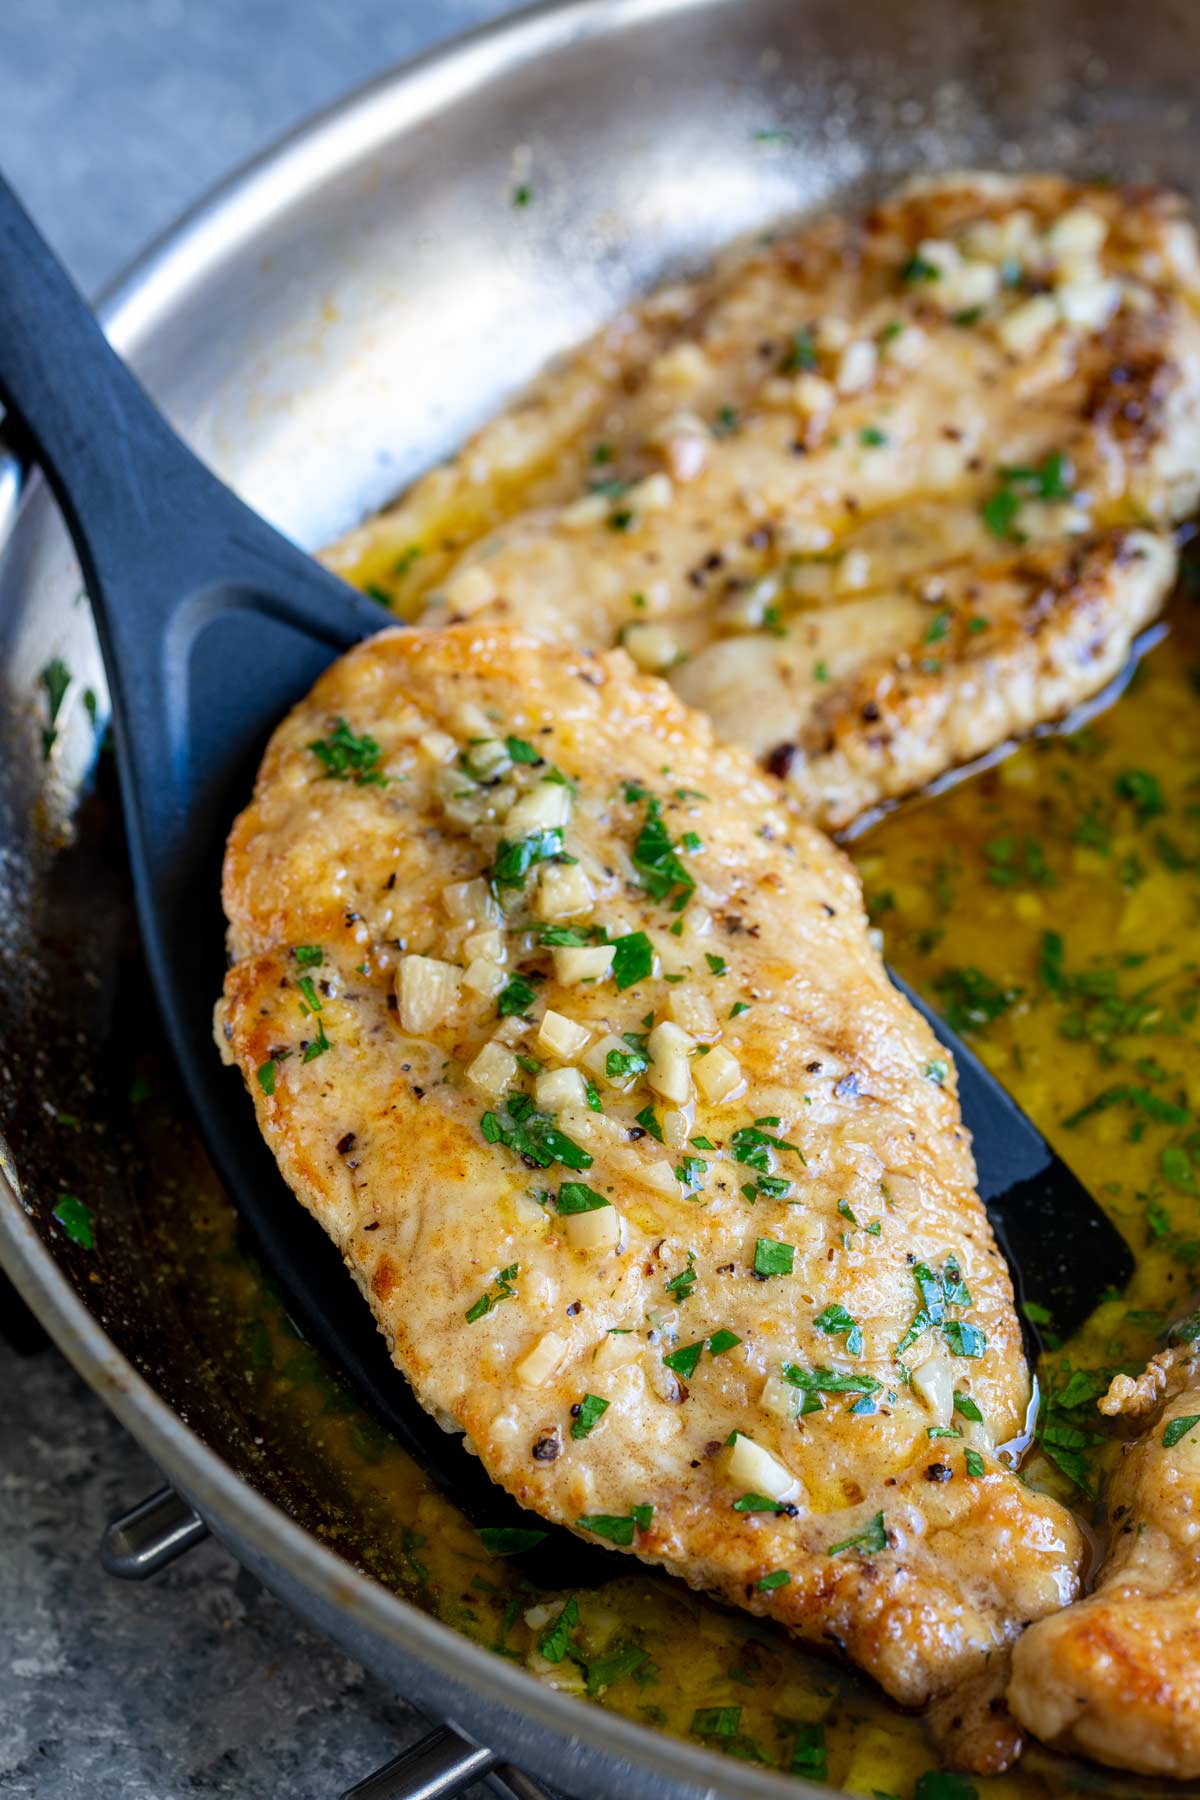 A garlic chicken breast being lifted from skillet with a black spatula